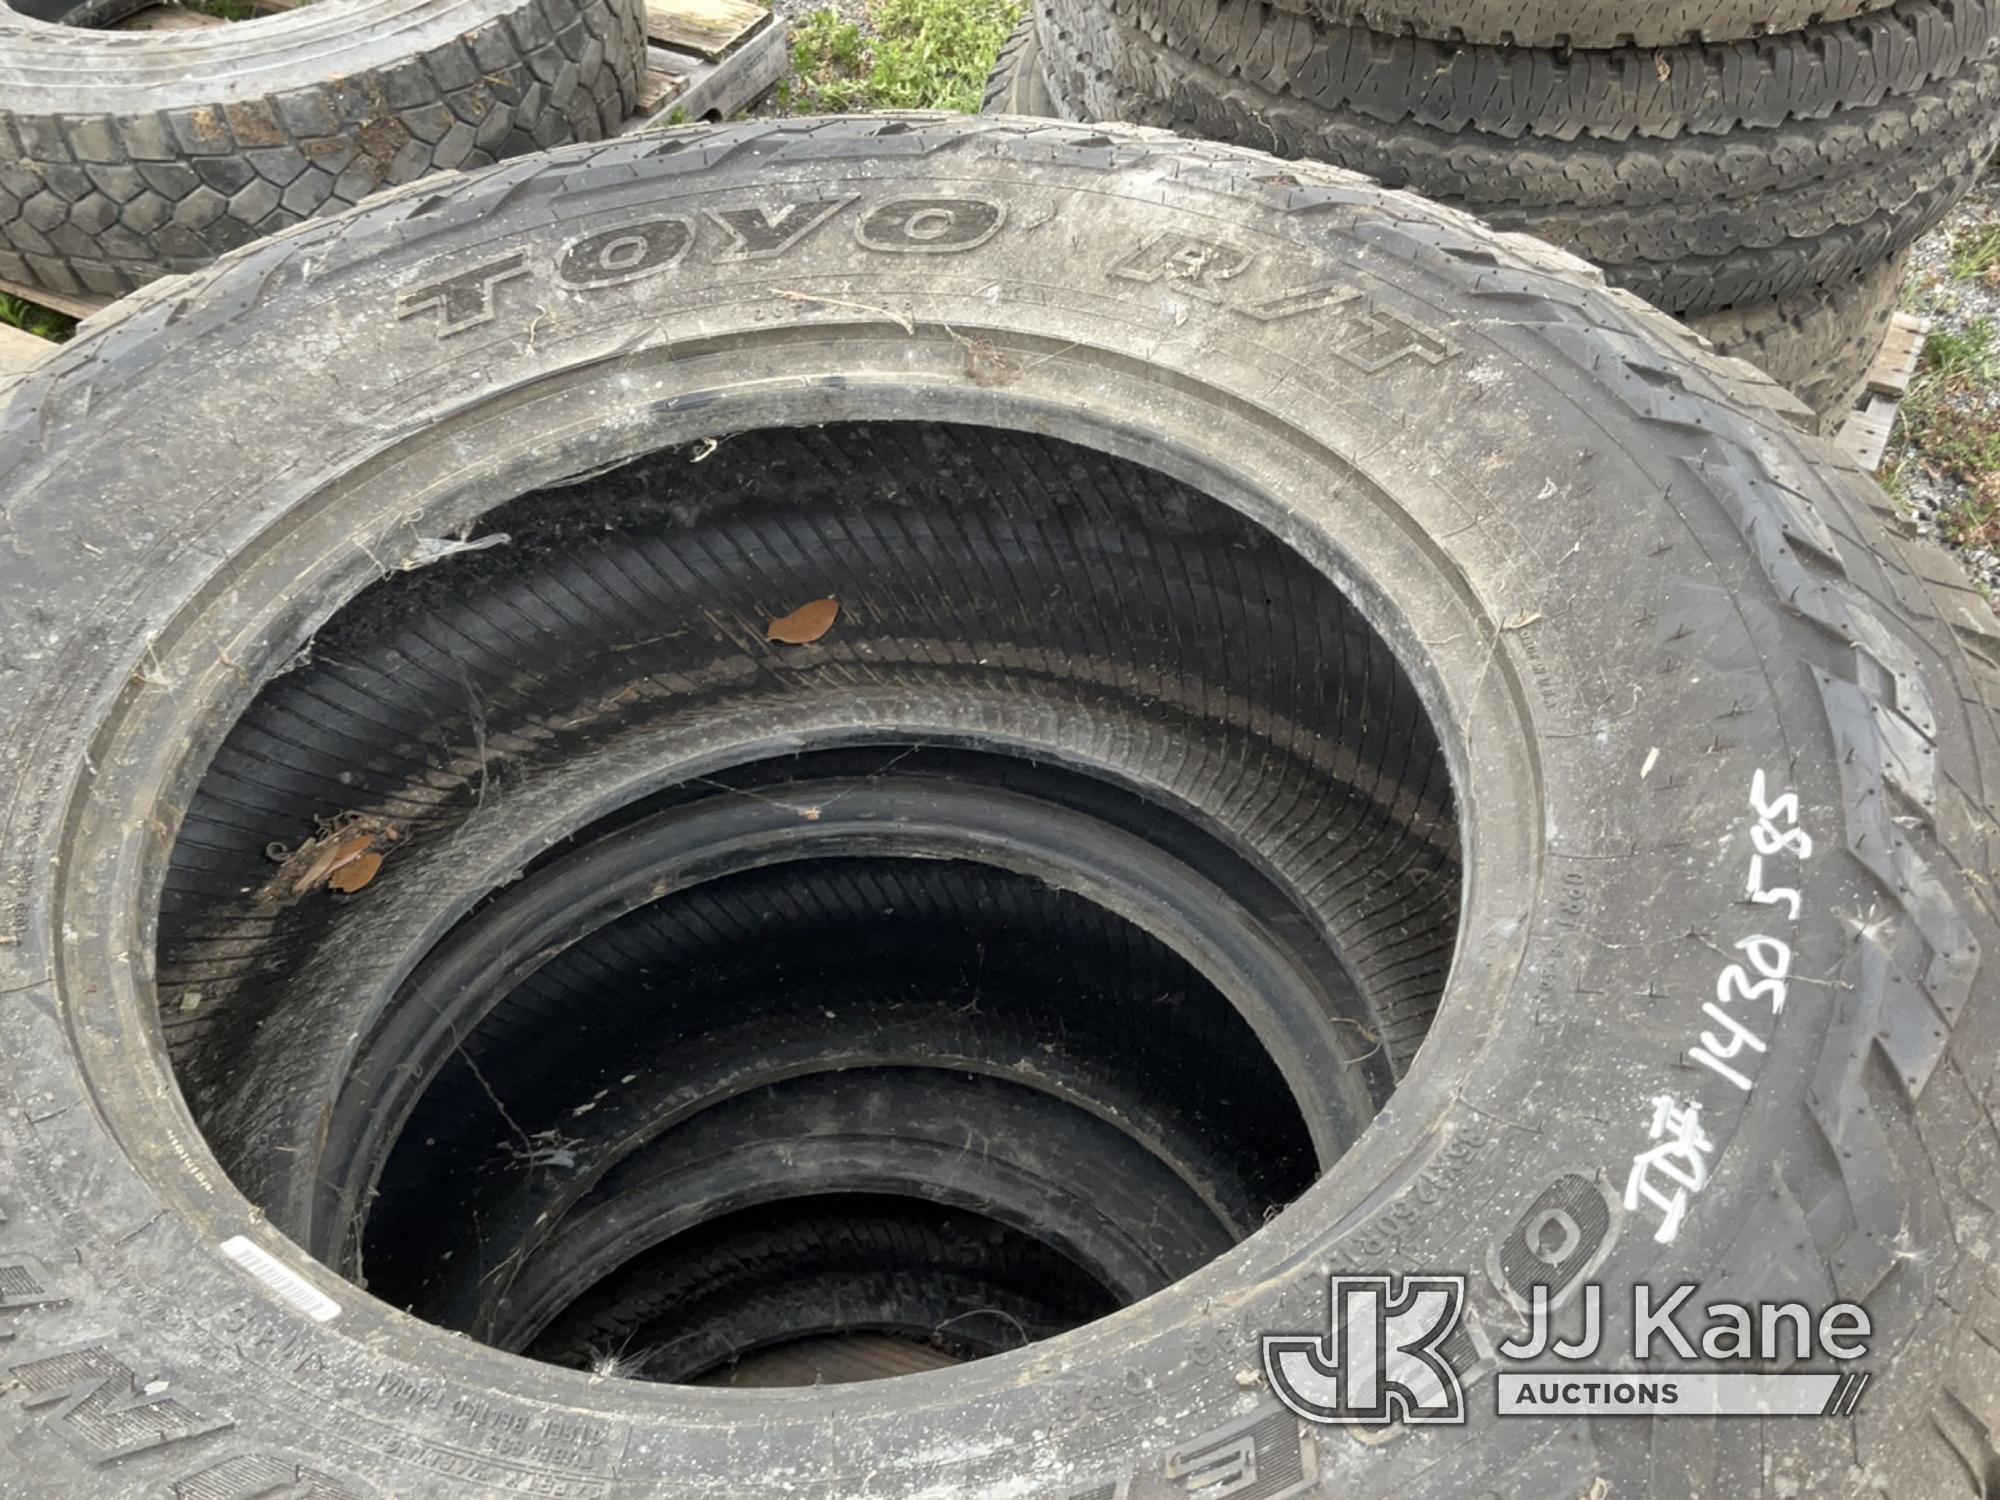 (Bowling Green, FL) 3 Used Toyo Tires - 35x12.50R18 NOTE: This unit is being sold AS IS/WHERE IS via